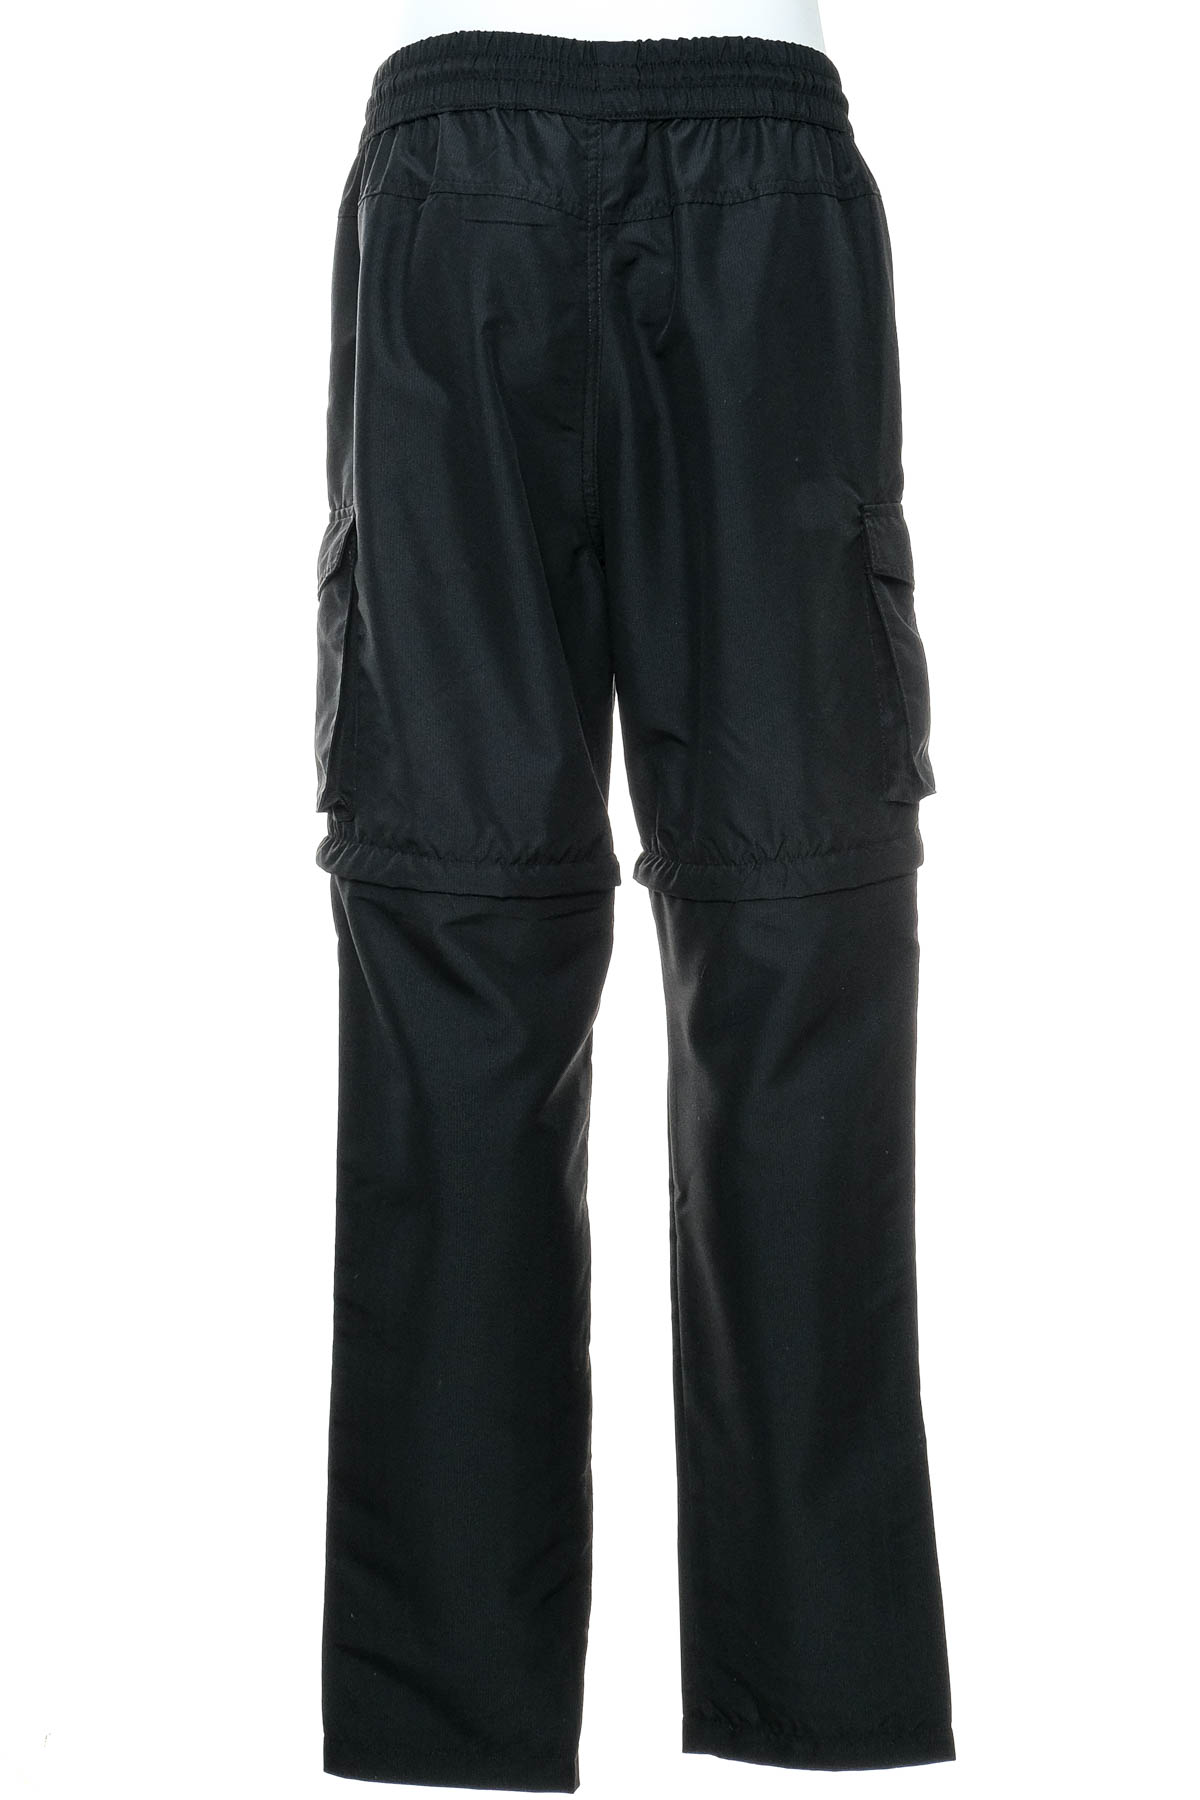 Men's trousers - X-Mail - 1